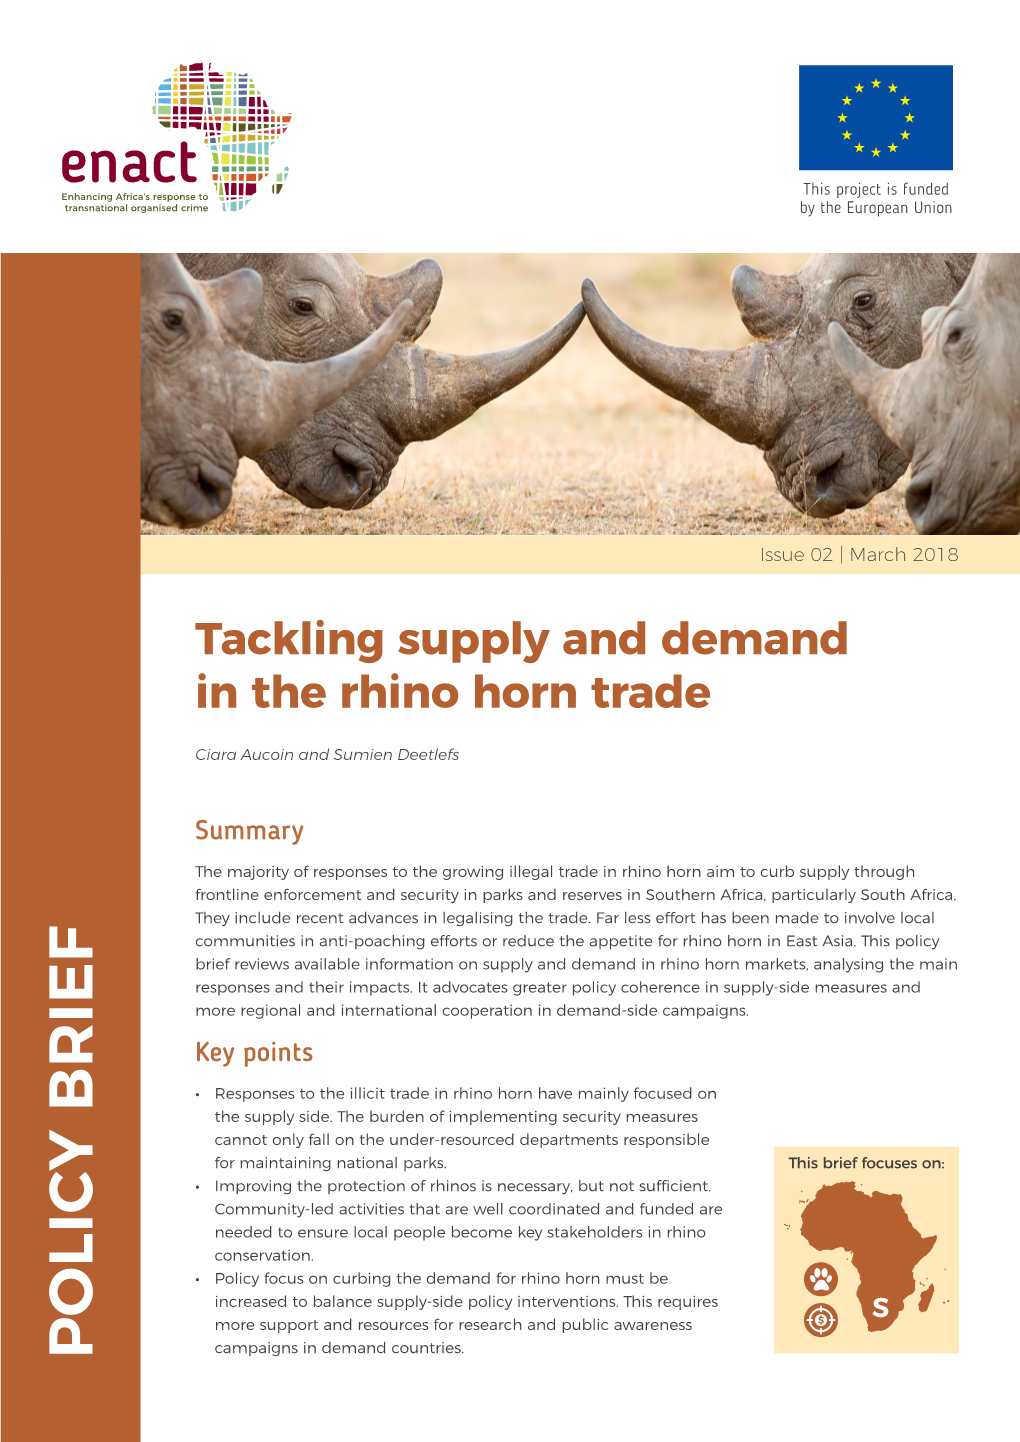 Tackling Supply and Demand in the Rhino Horn Trade